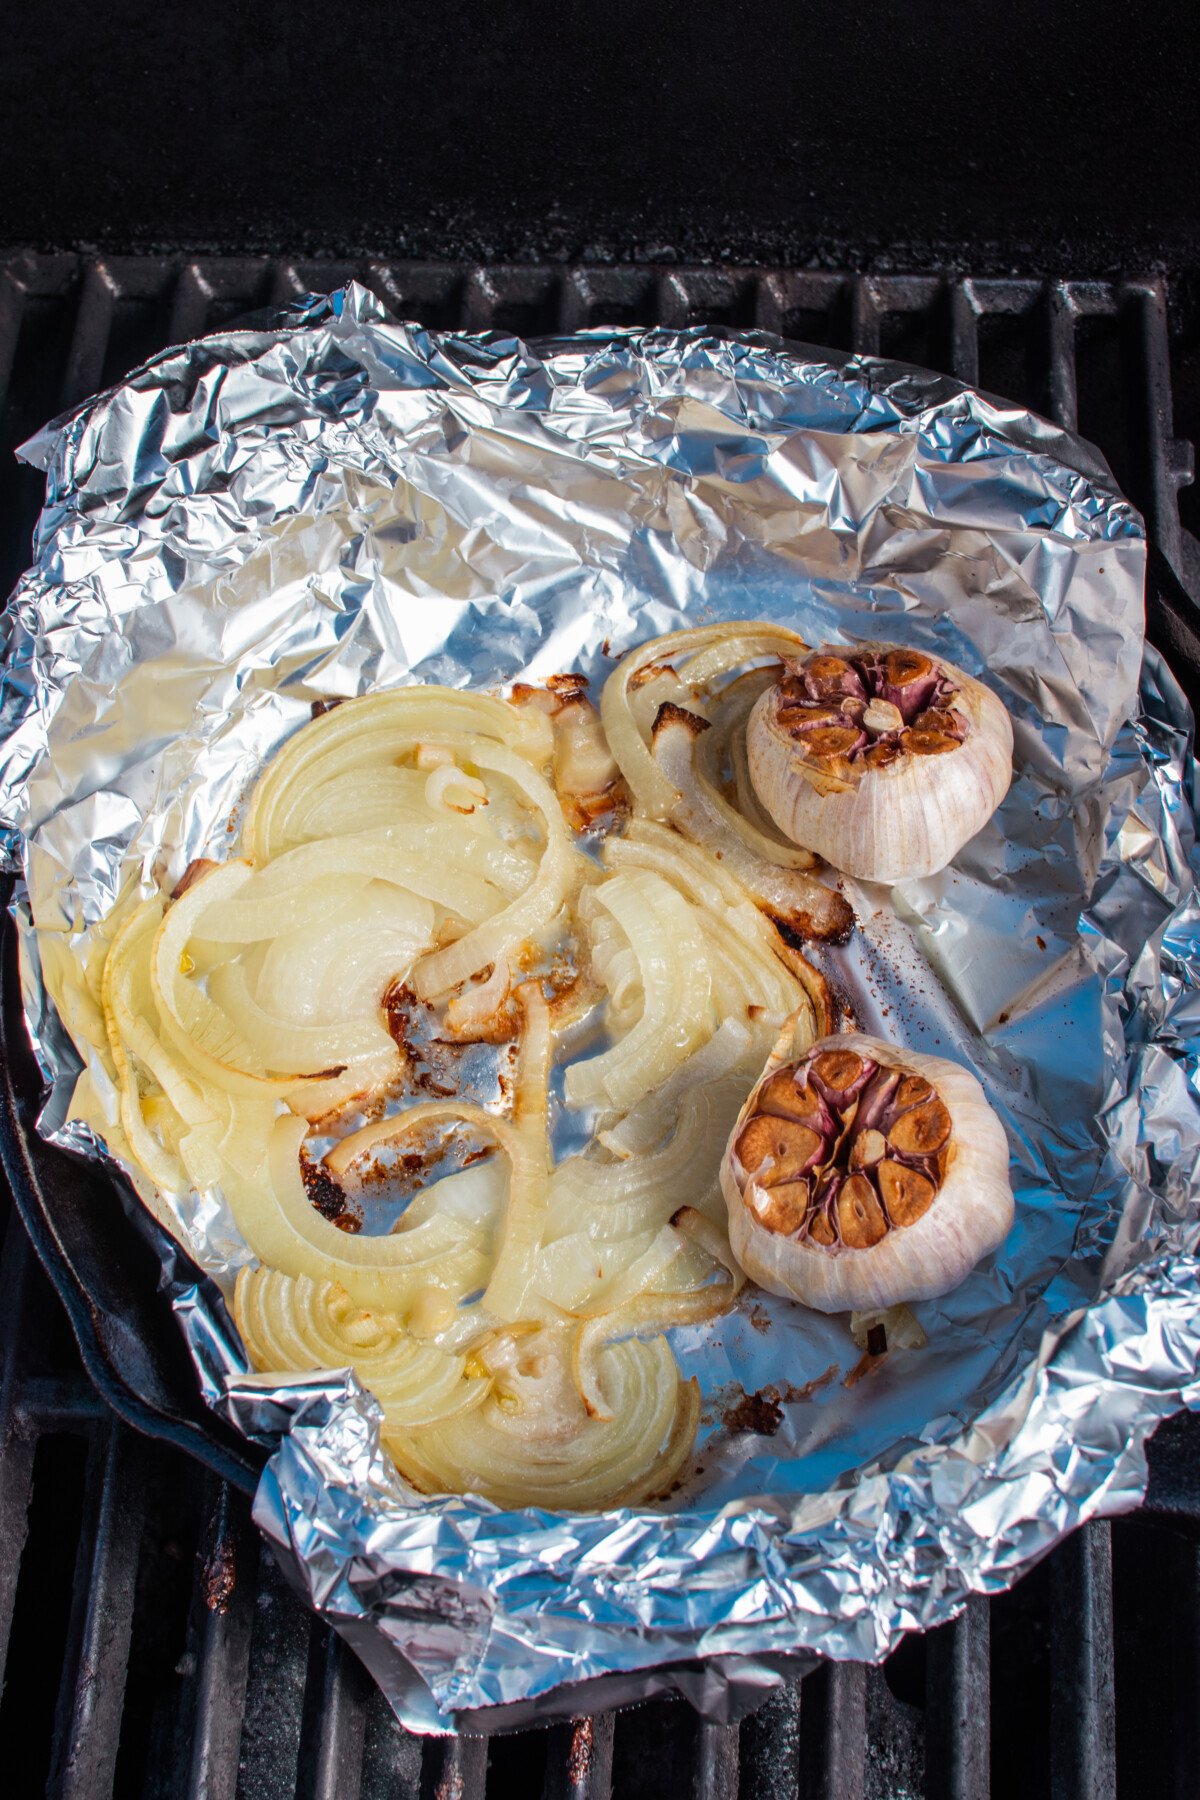 Onions and garlic cooked to golden brown in foil on grill.